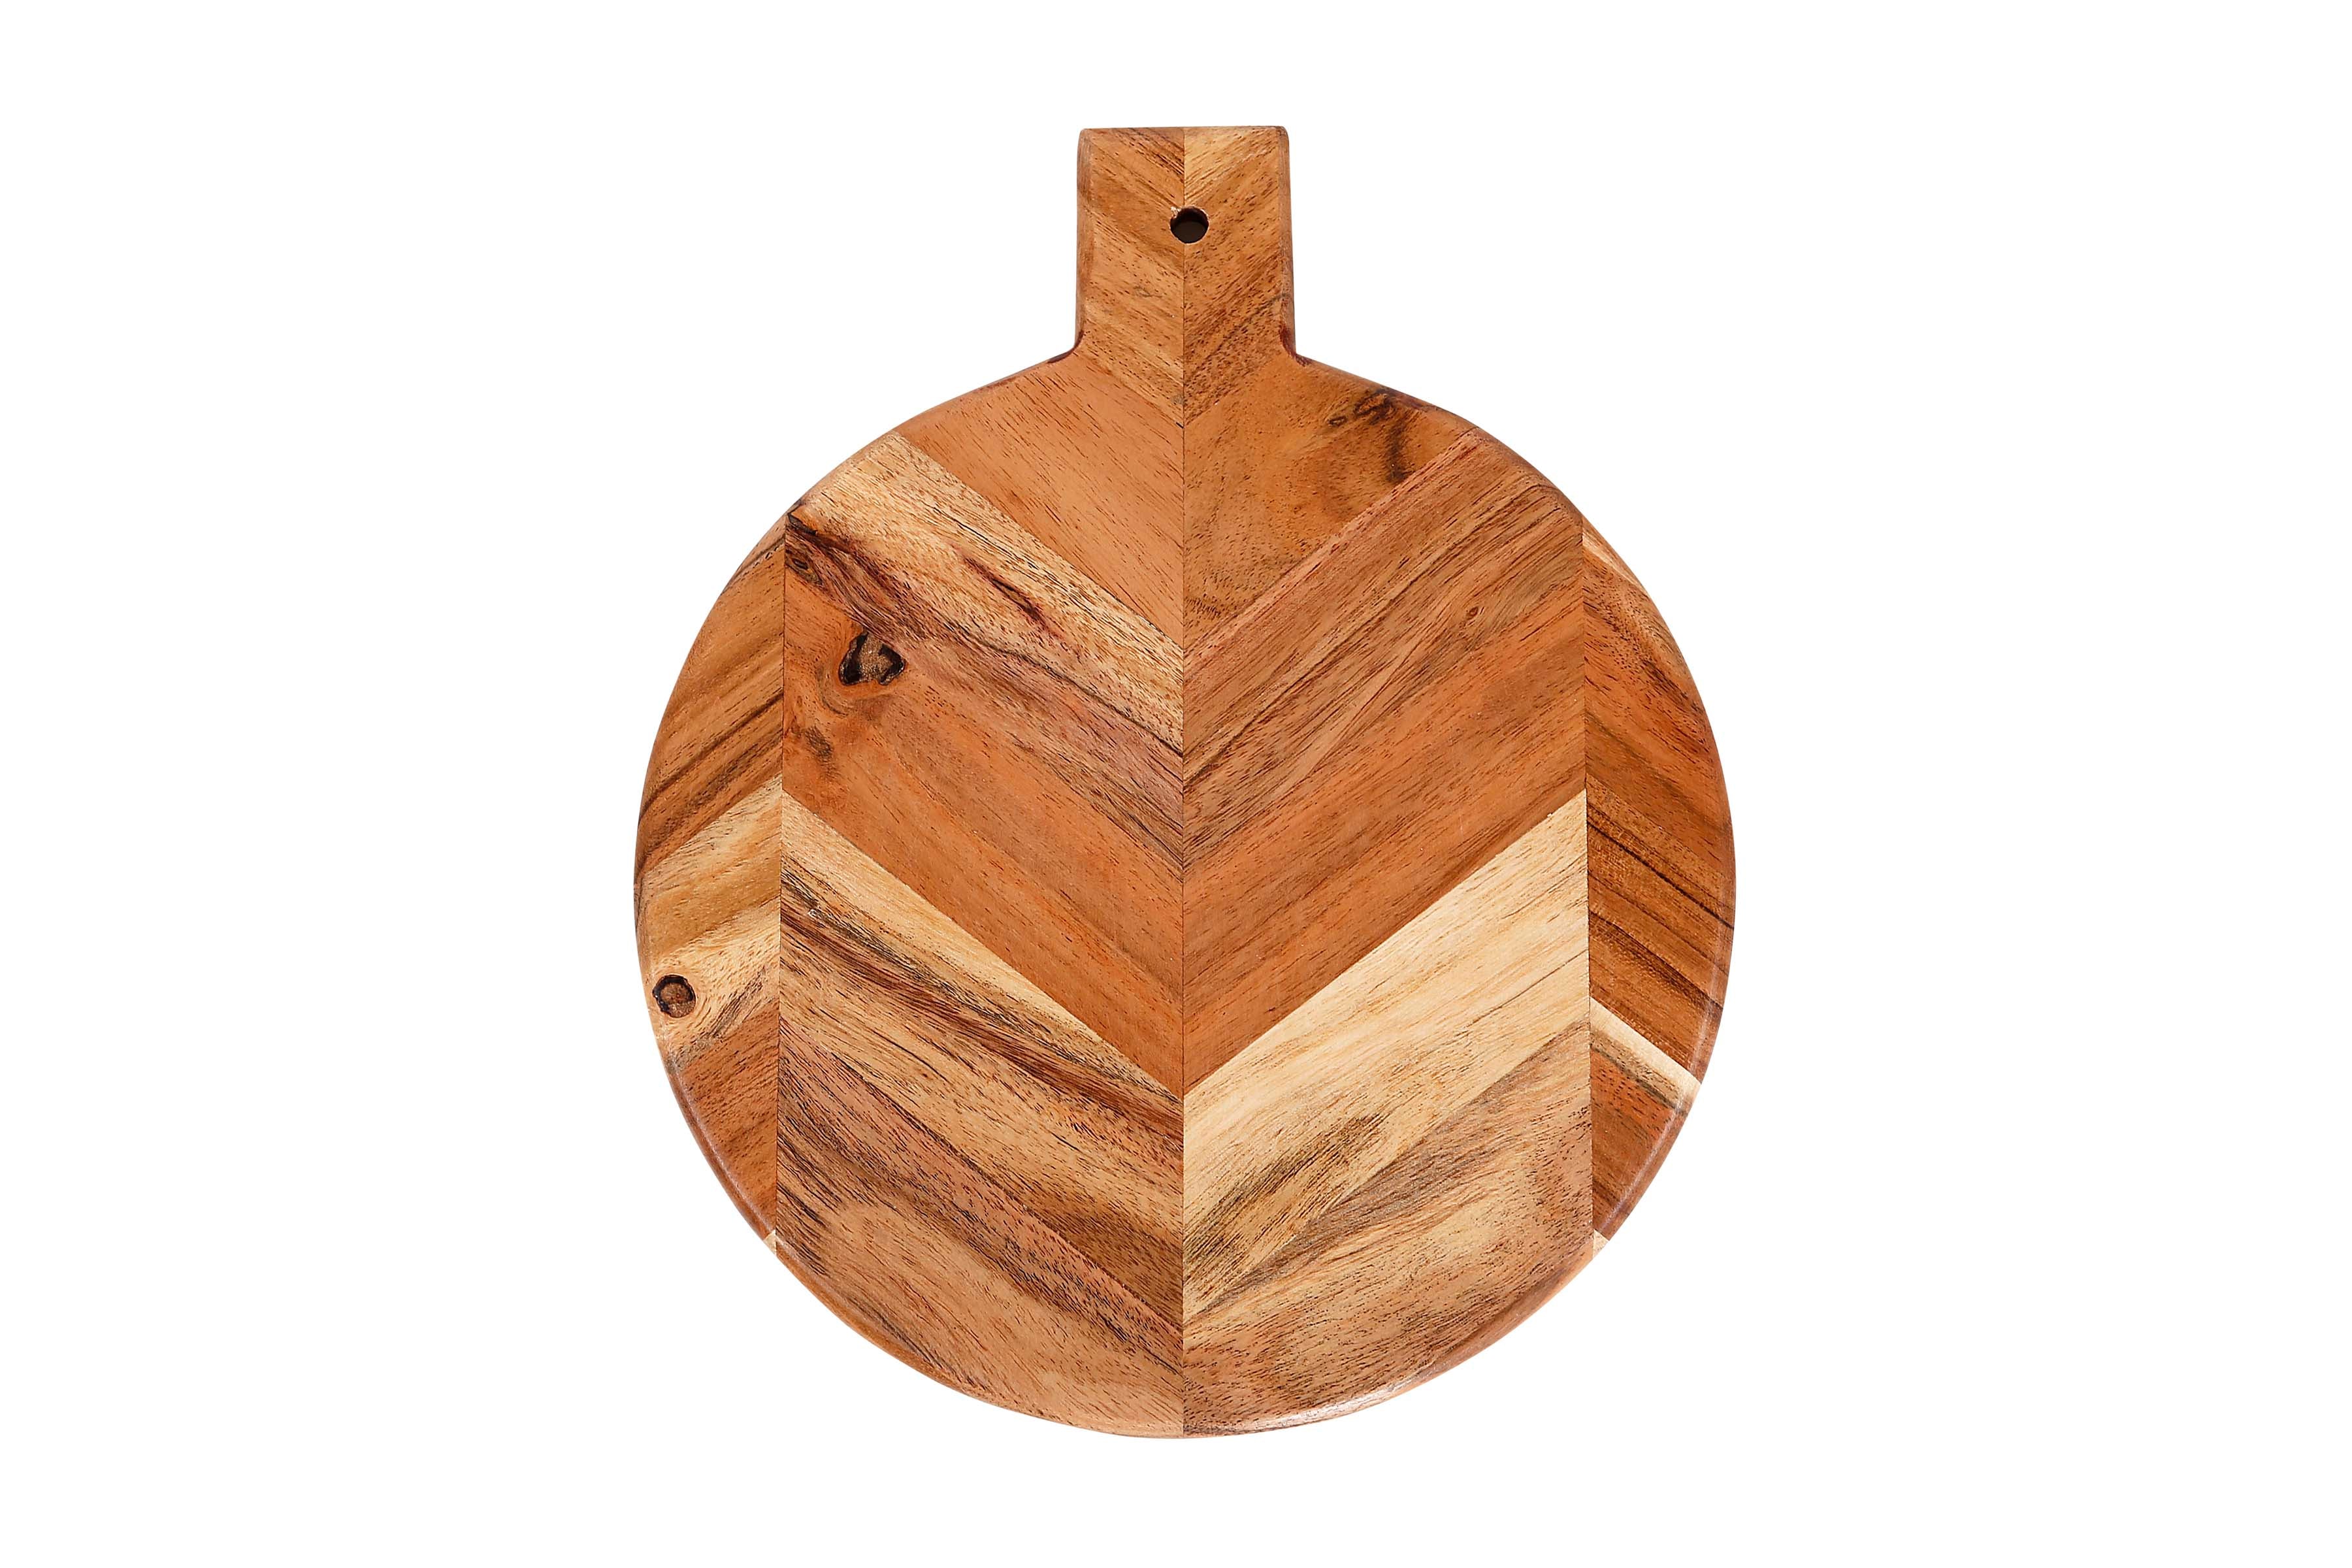 Rustic Serving Denmark 2 Piece Acacia Wood Round Cutting Board Set (Set of 2)